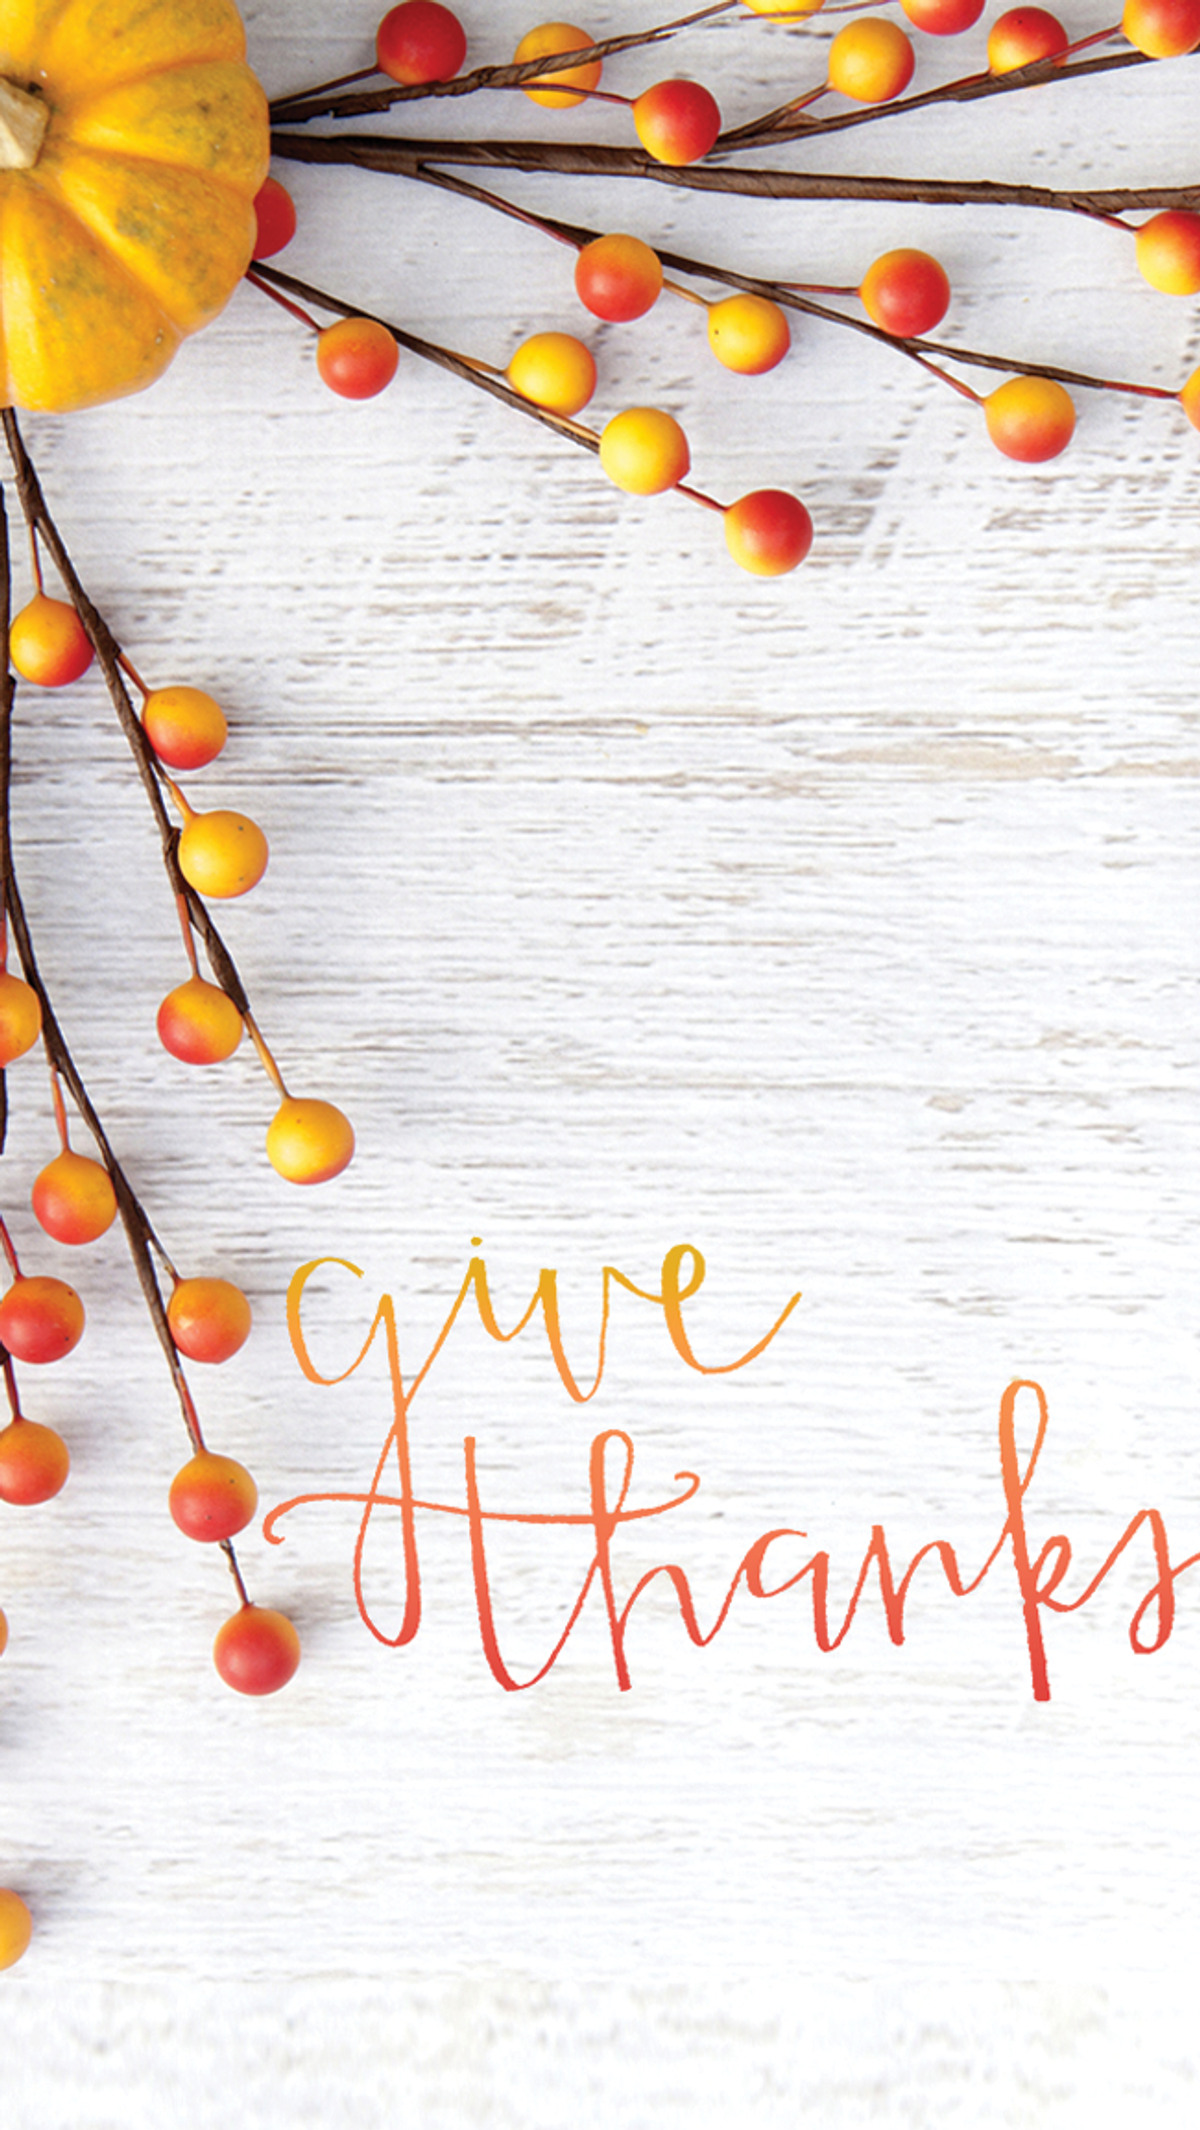 24 Days Of Giving Thanks